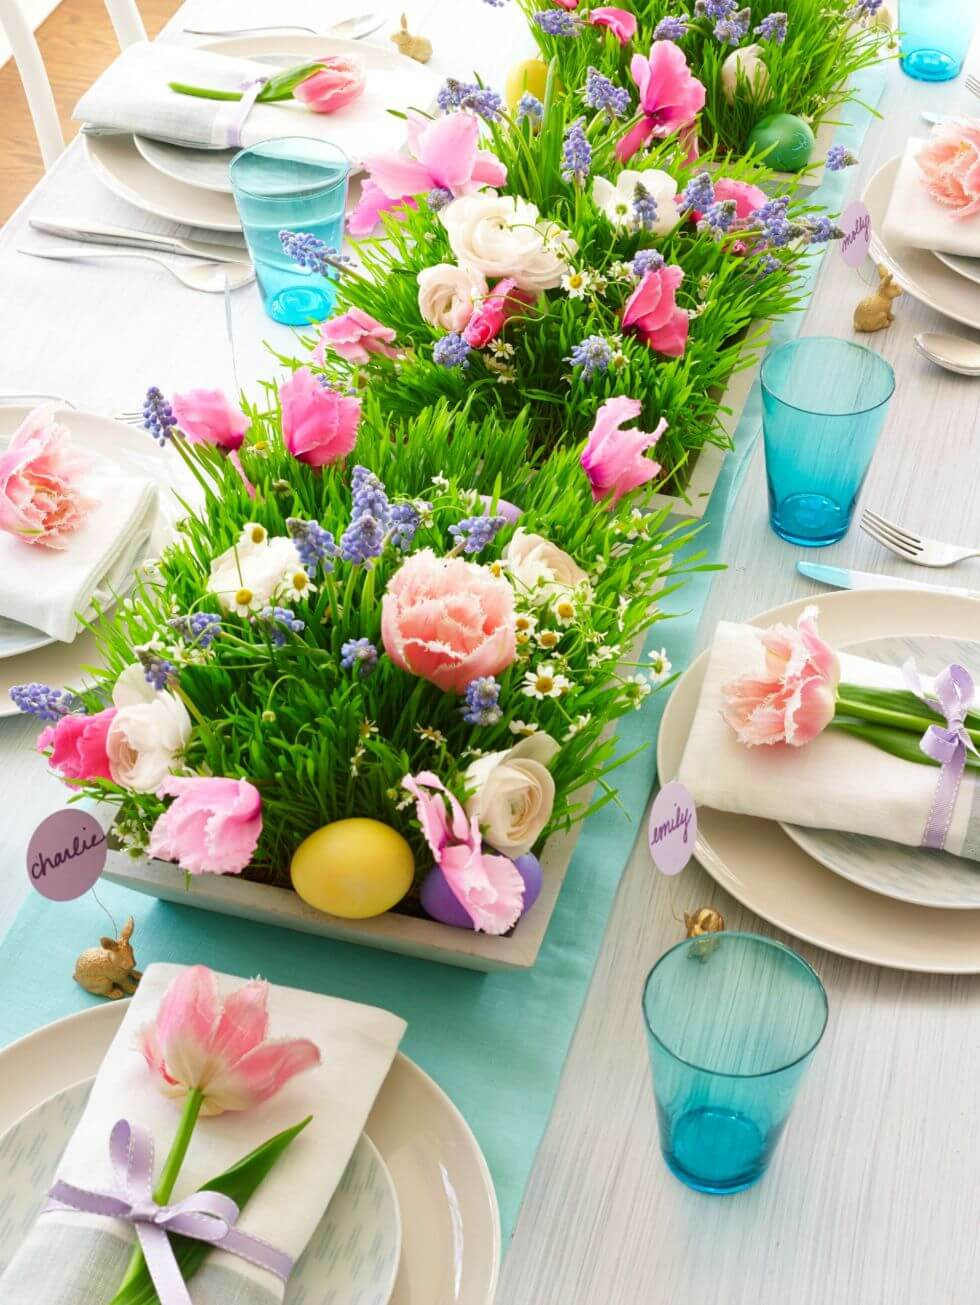 Easter Dinner Ideas 2019
 27 Best DIY Easter Centerpieces Ideas and Designs for 2019